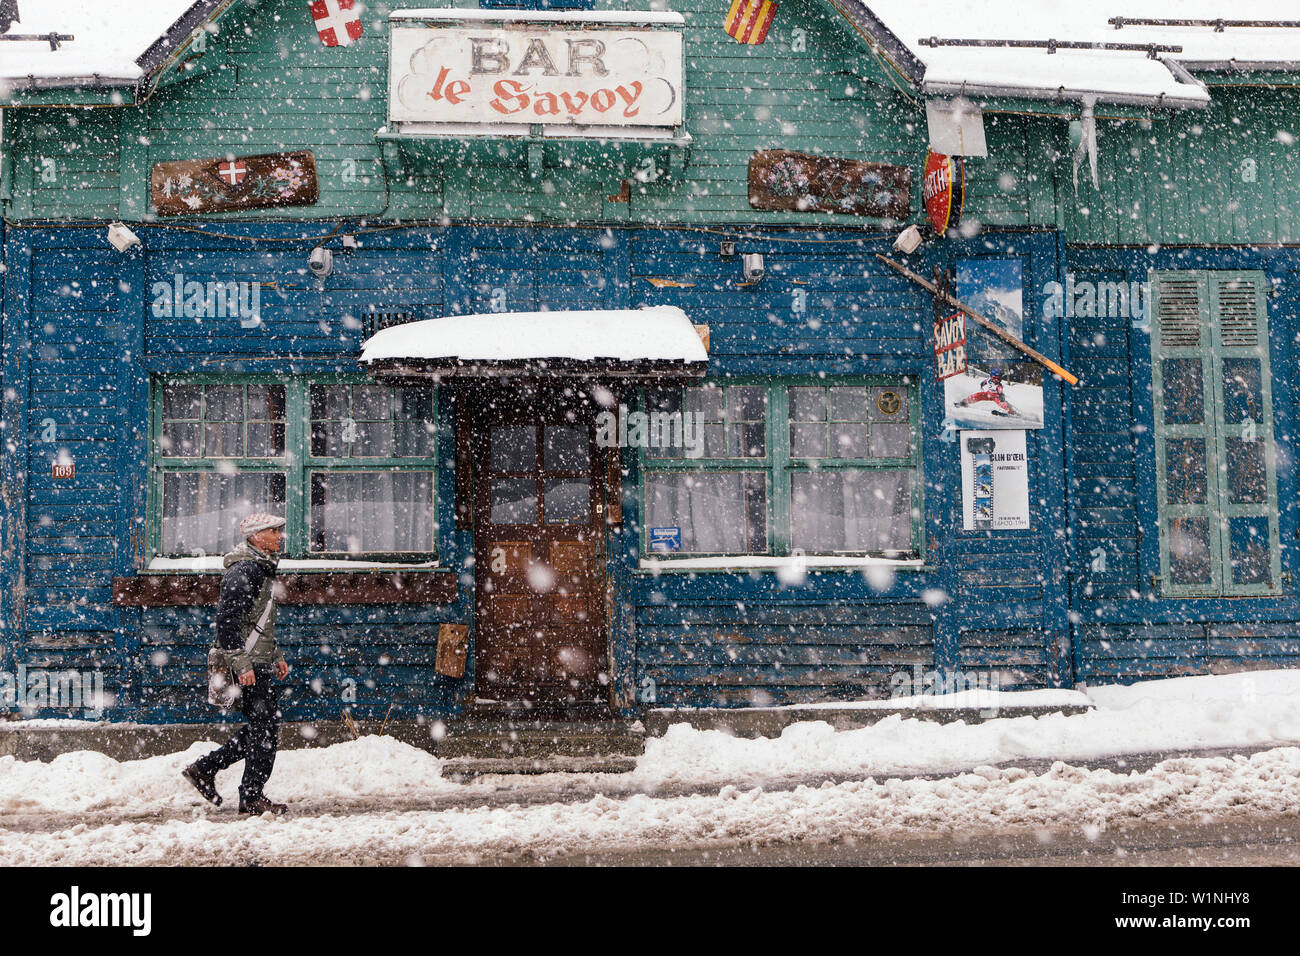 Man in snow outside a bar, Argentiere, France Stock Photo